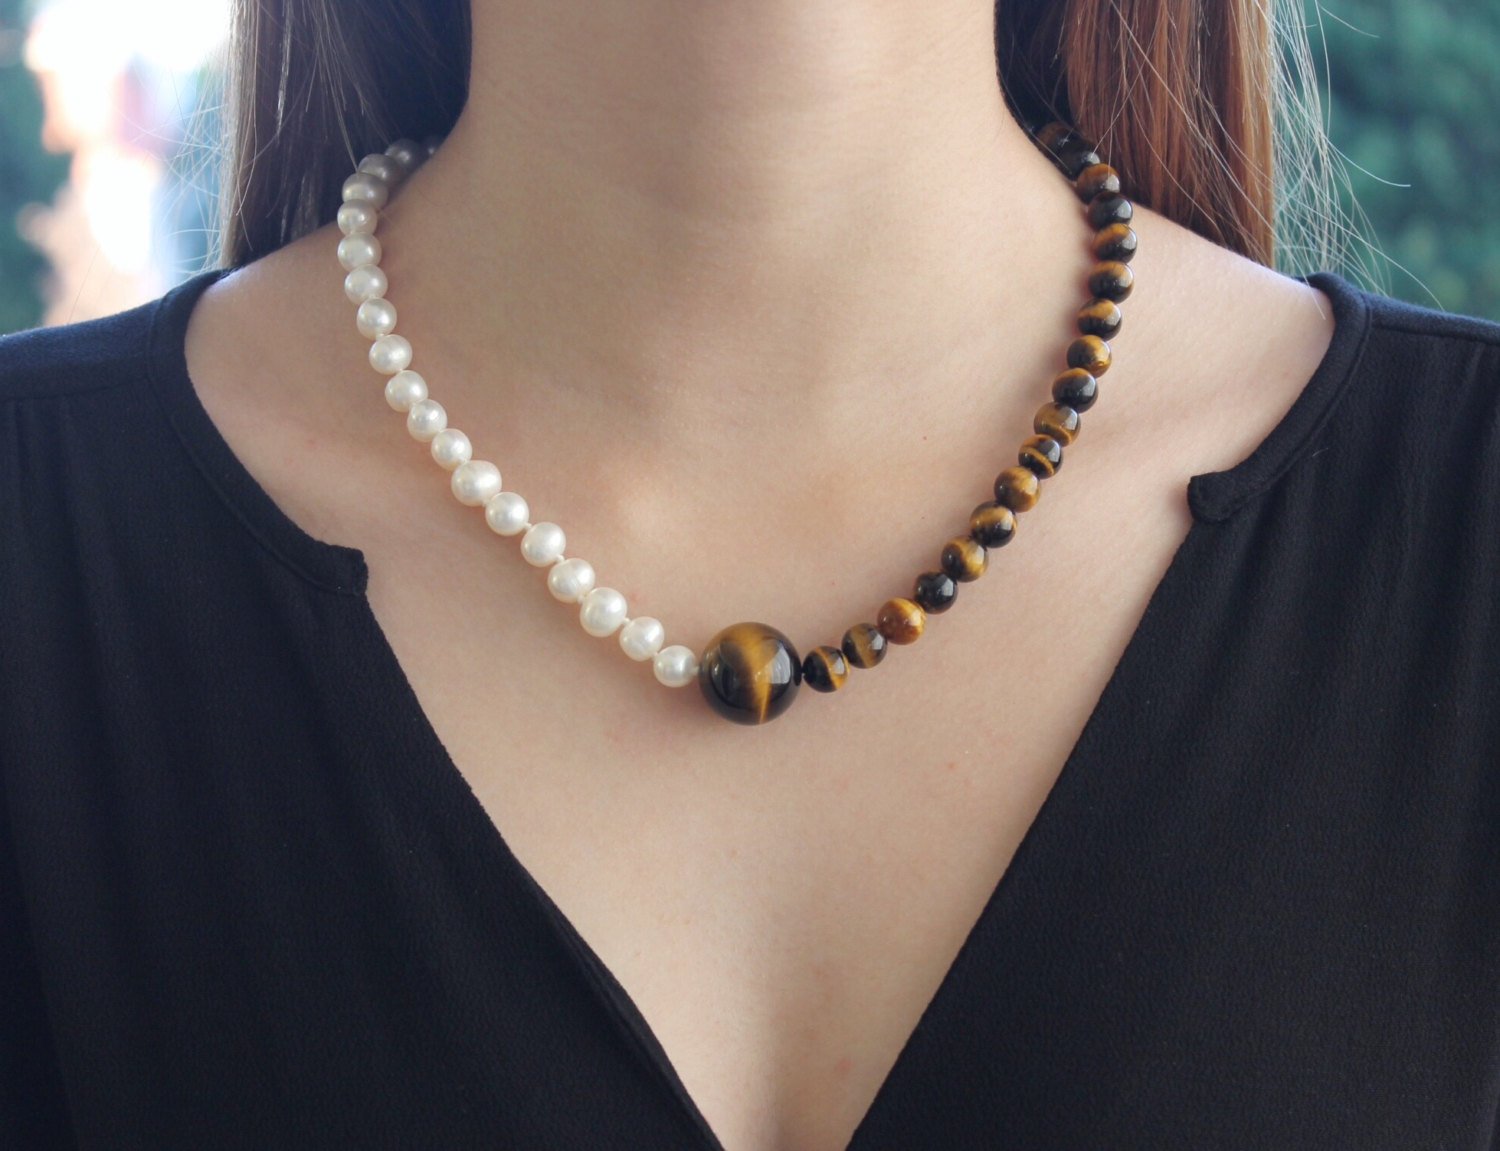 Pearl - Freshwater pearls and tiger eye quartz necklace and earrings set